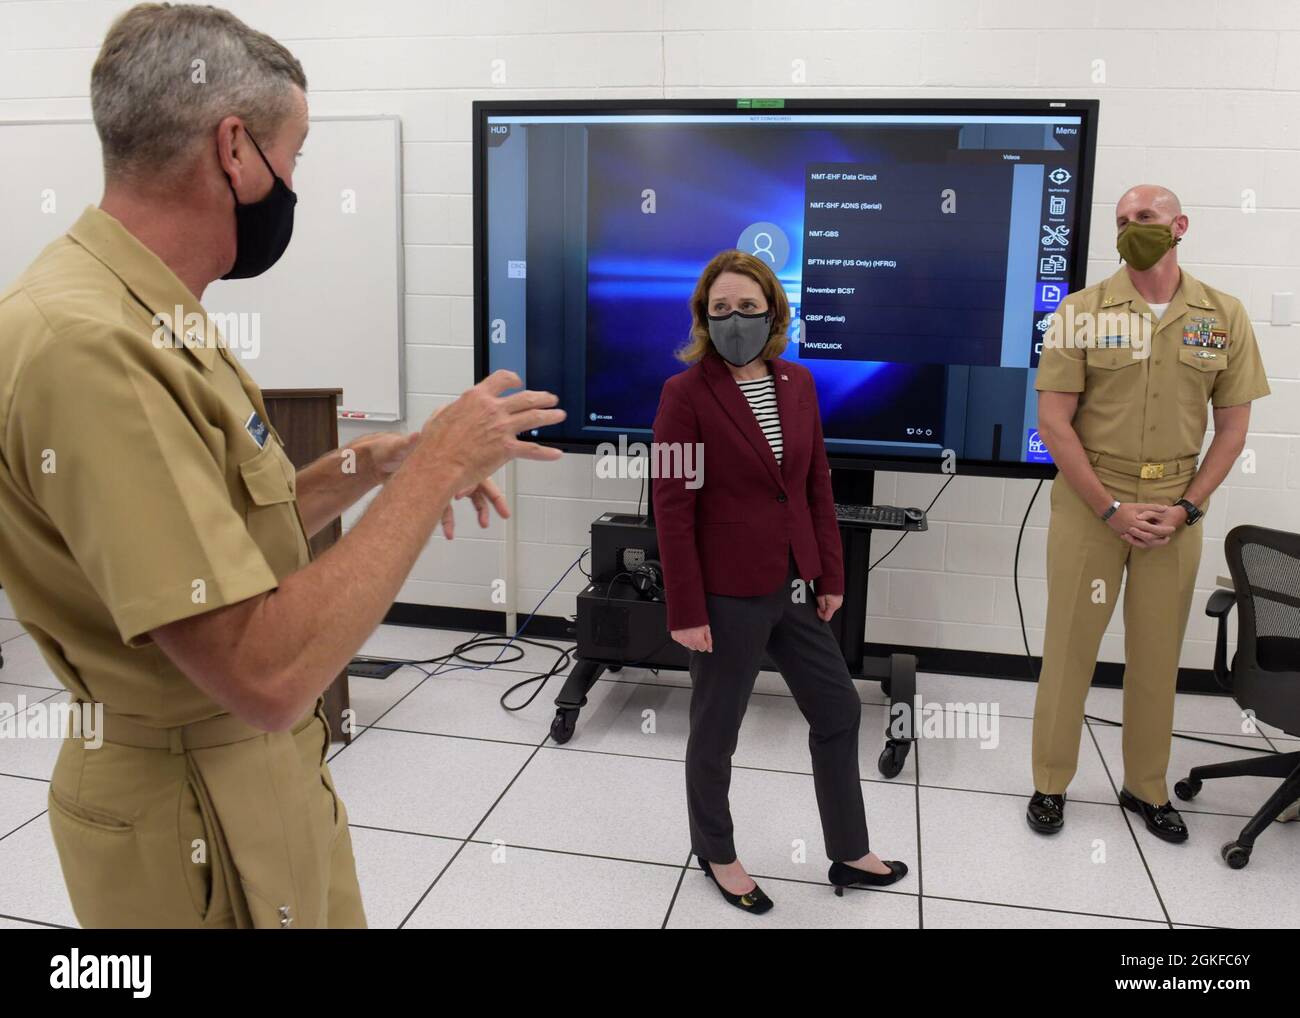 210408-N-XX139-0084 PENSACOLA, Fla. (April 8, 2020) Deputy Secretary of Defense Kathleen H. Hicks participates in a Multipurpose Reconfigurable Training System 3D® (MRTS 3D®) technology training device demonstration and discussion with Rear Adm. Pete Garvin (left), commander, Naval Education and Training Command and staff of the Center for Information Warfare Training and Information Warfare Training Command (IWTC) Corry Station. Hicks, along with members of her staff, visited for a familiarization brief and tour of CIWT and IWTC Corry Station onboard Naval Air Station Pensacola Corry Station, Stock Photo